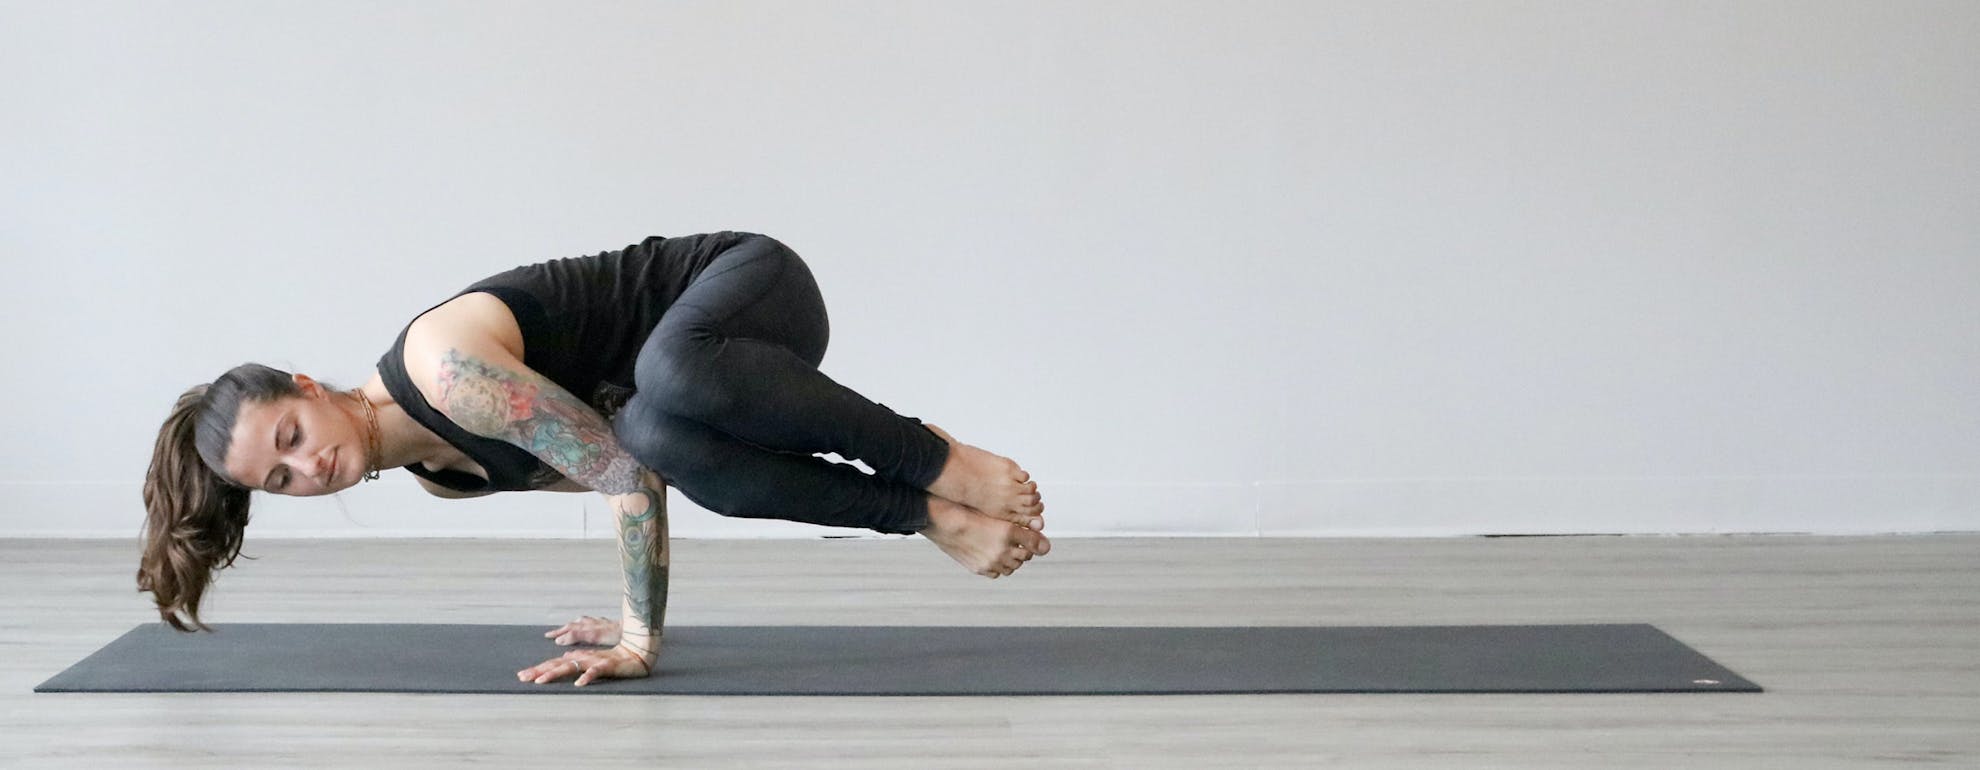 Yoga gaining popularity as a welcome performance enhancer - Global Sport  Matters